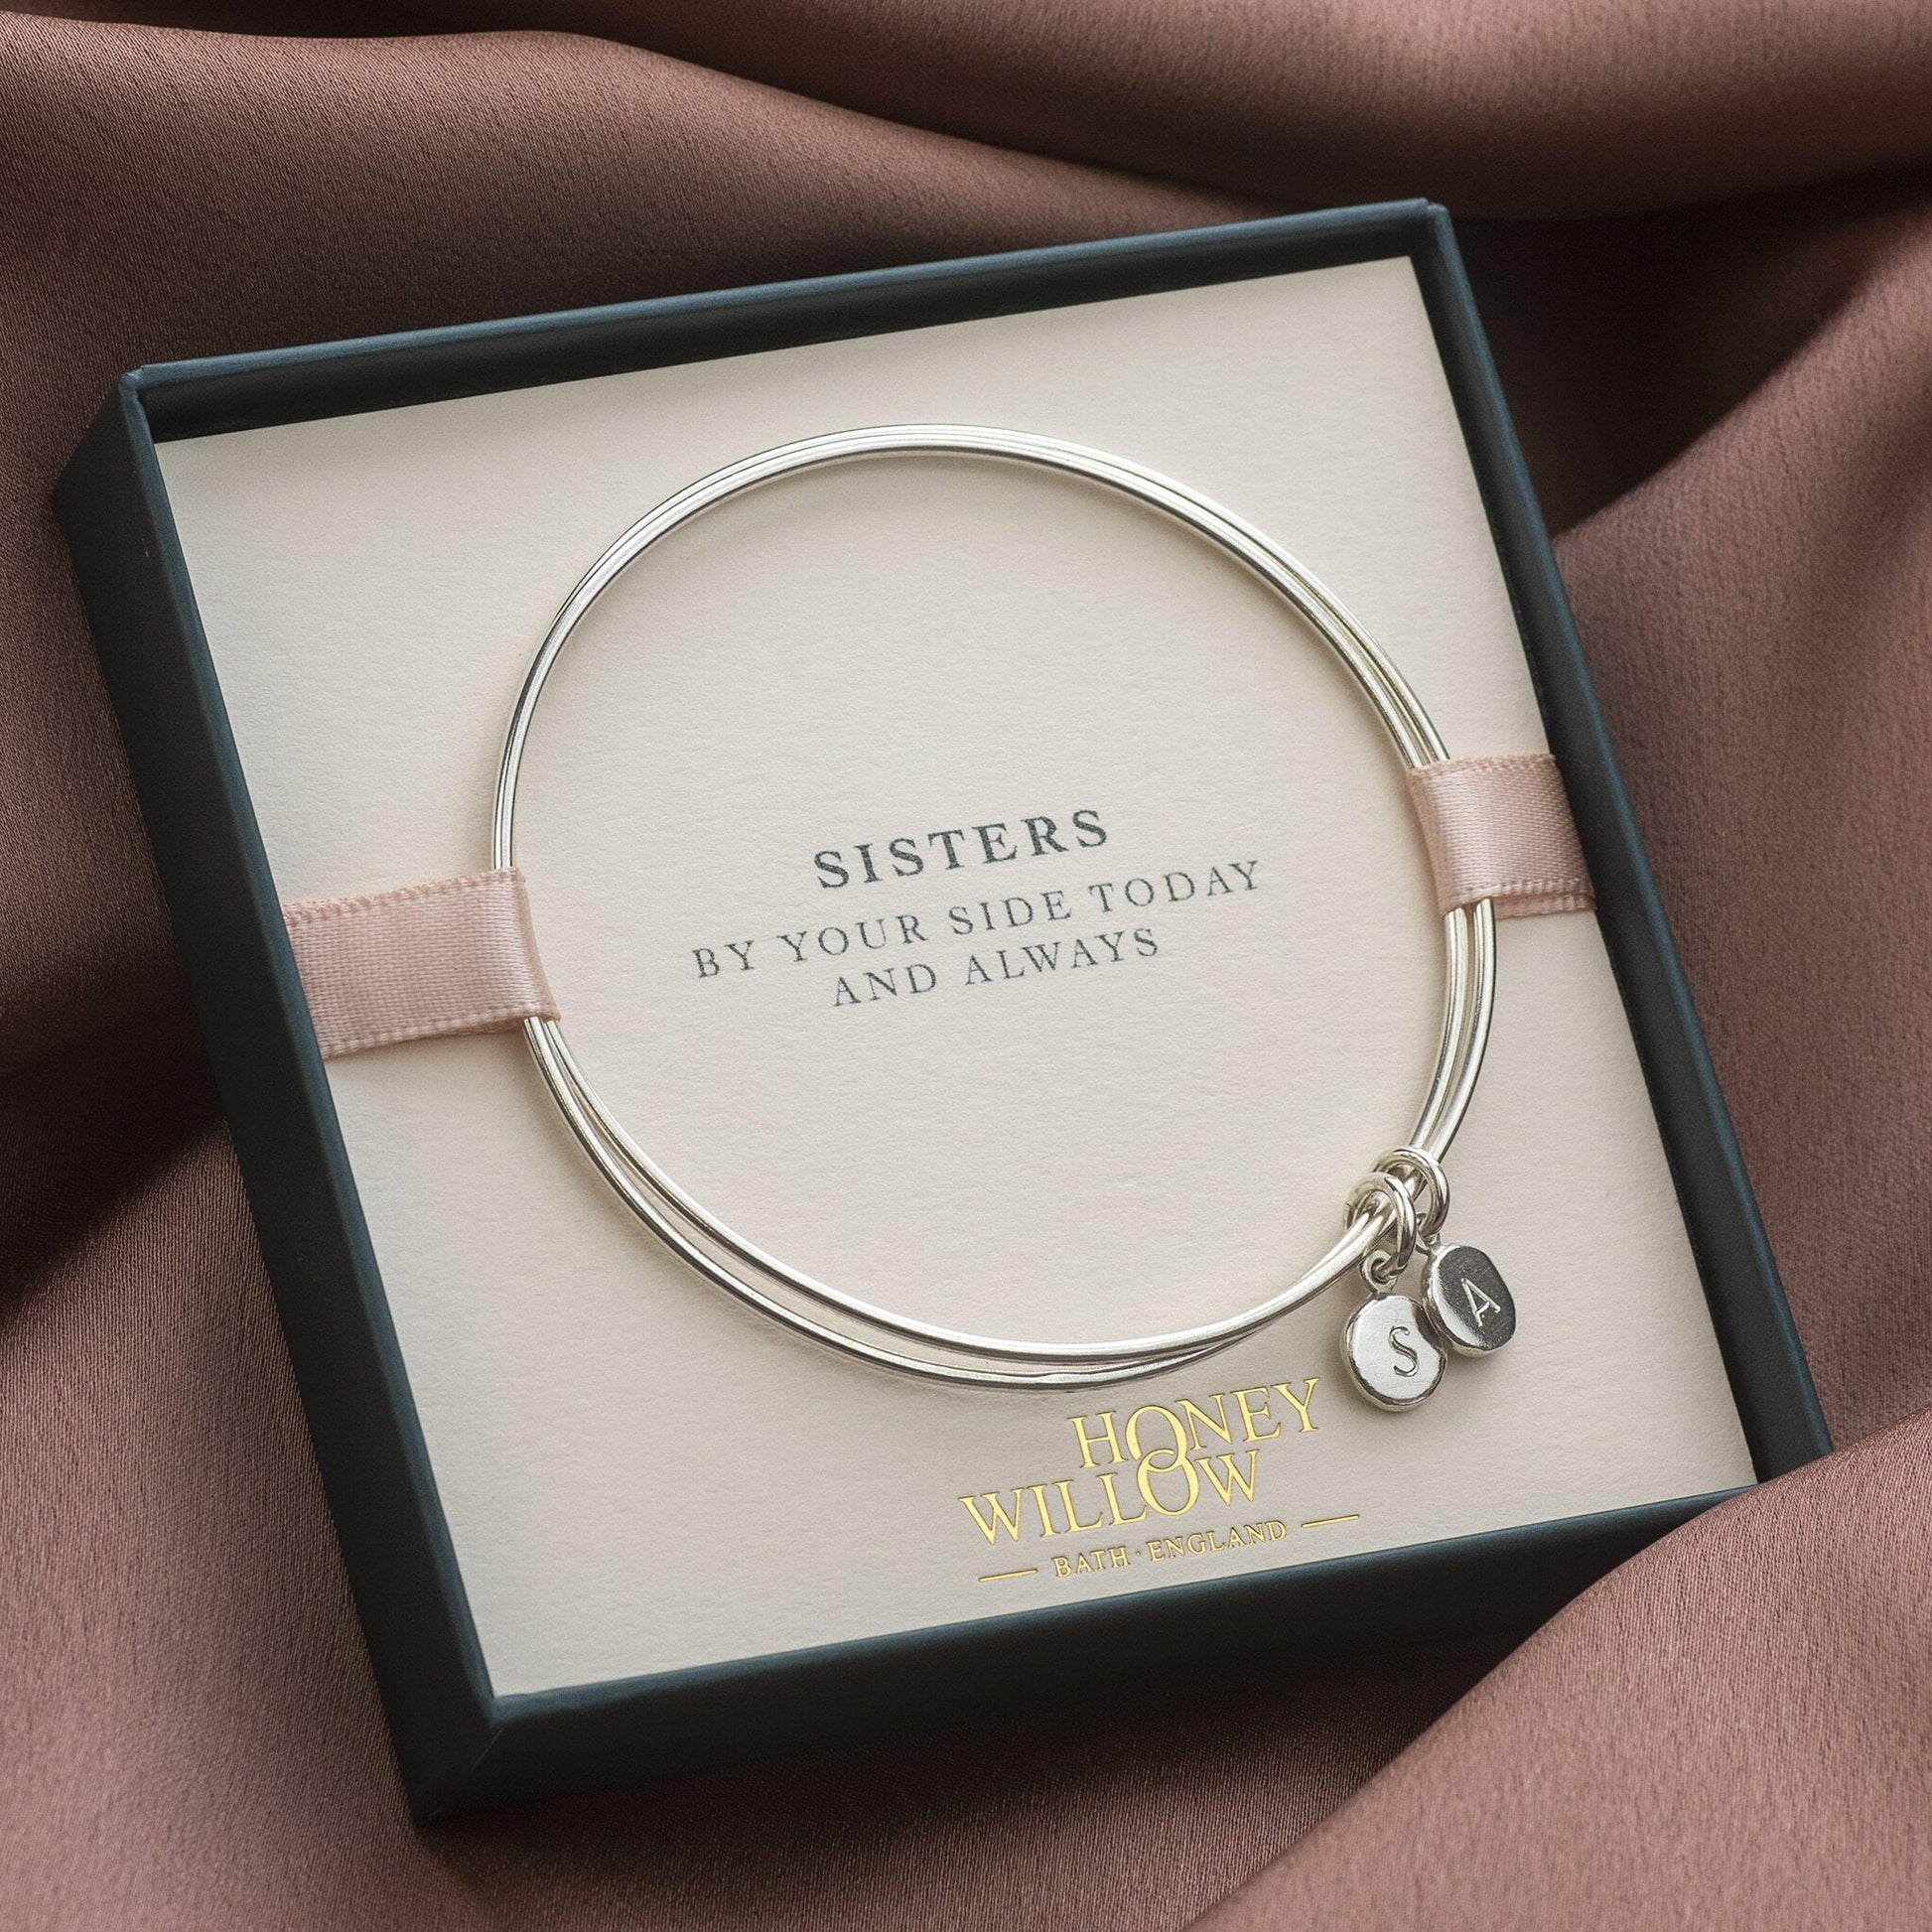 Gift for Bride from Sister - Double Linked Bangle with Initials - Linked for a Lifetime